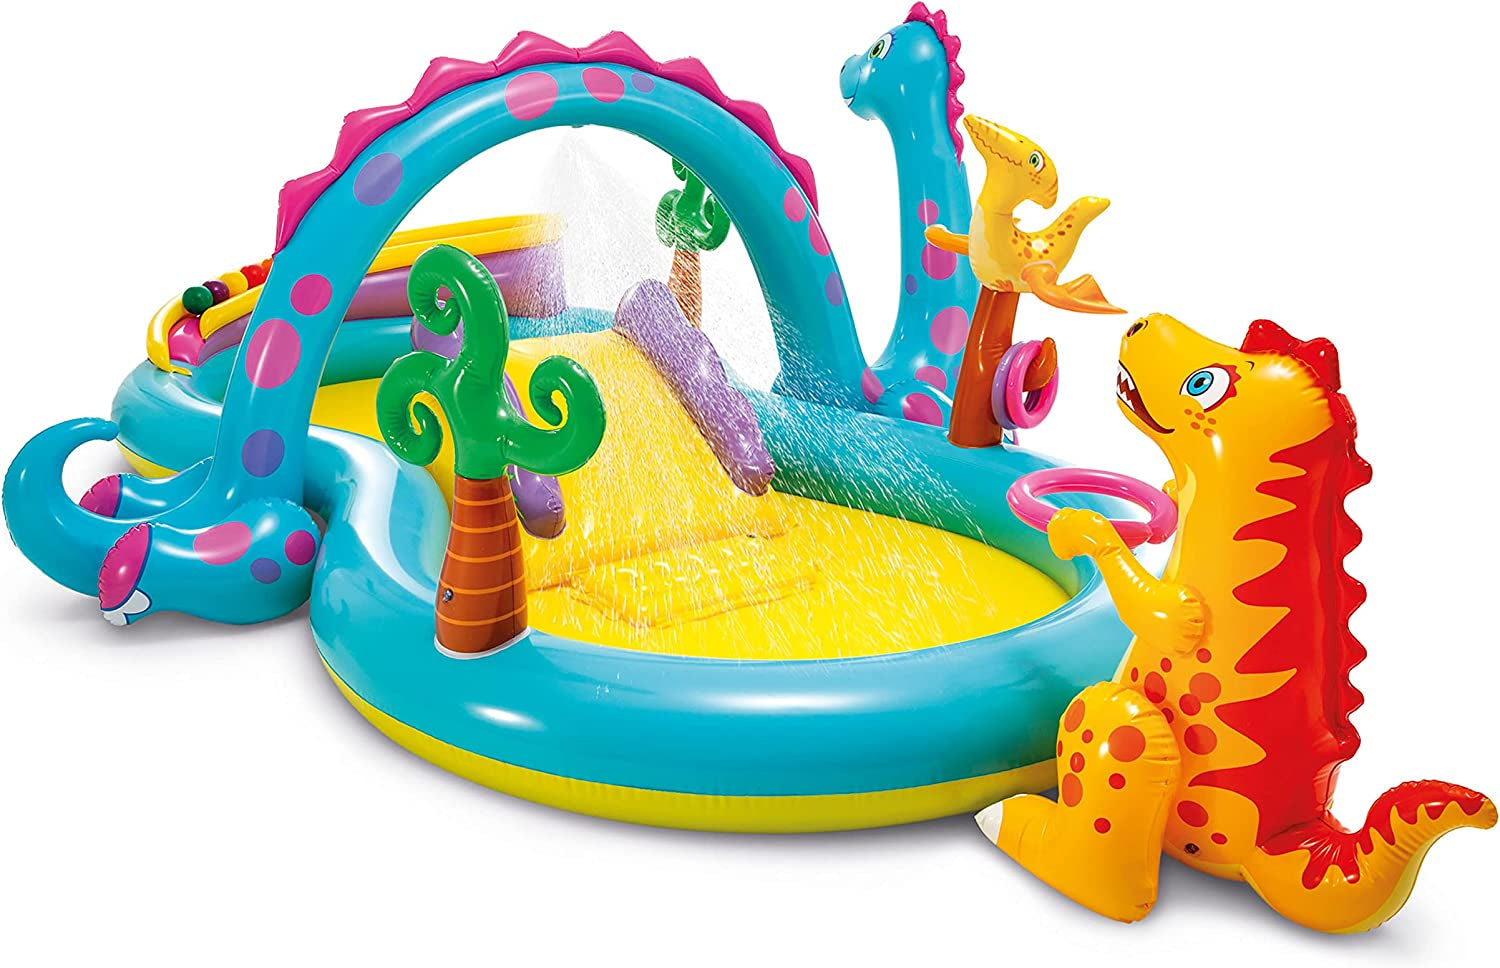 Inflatable Dinosaur Play Center with Water Slide, Ball Toss, and Ring Toss